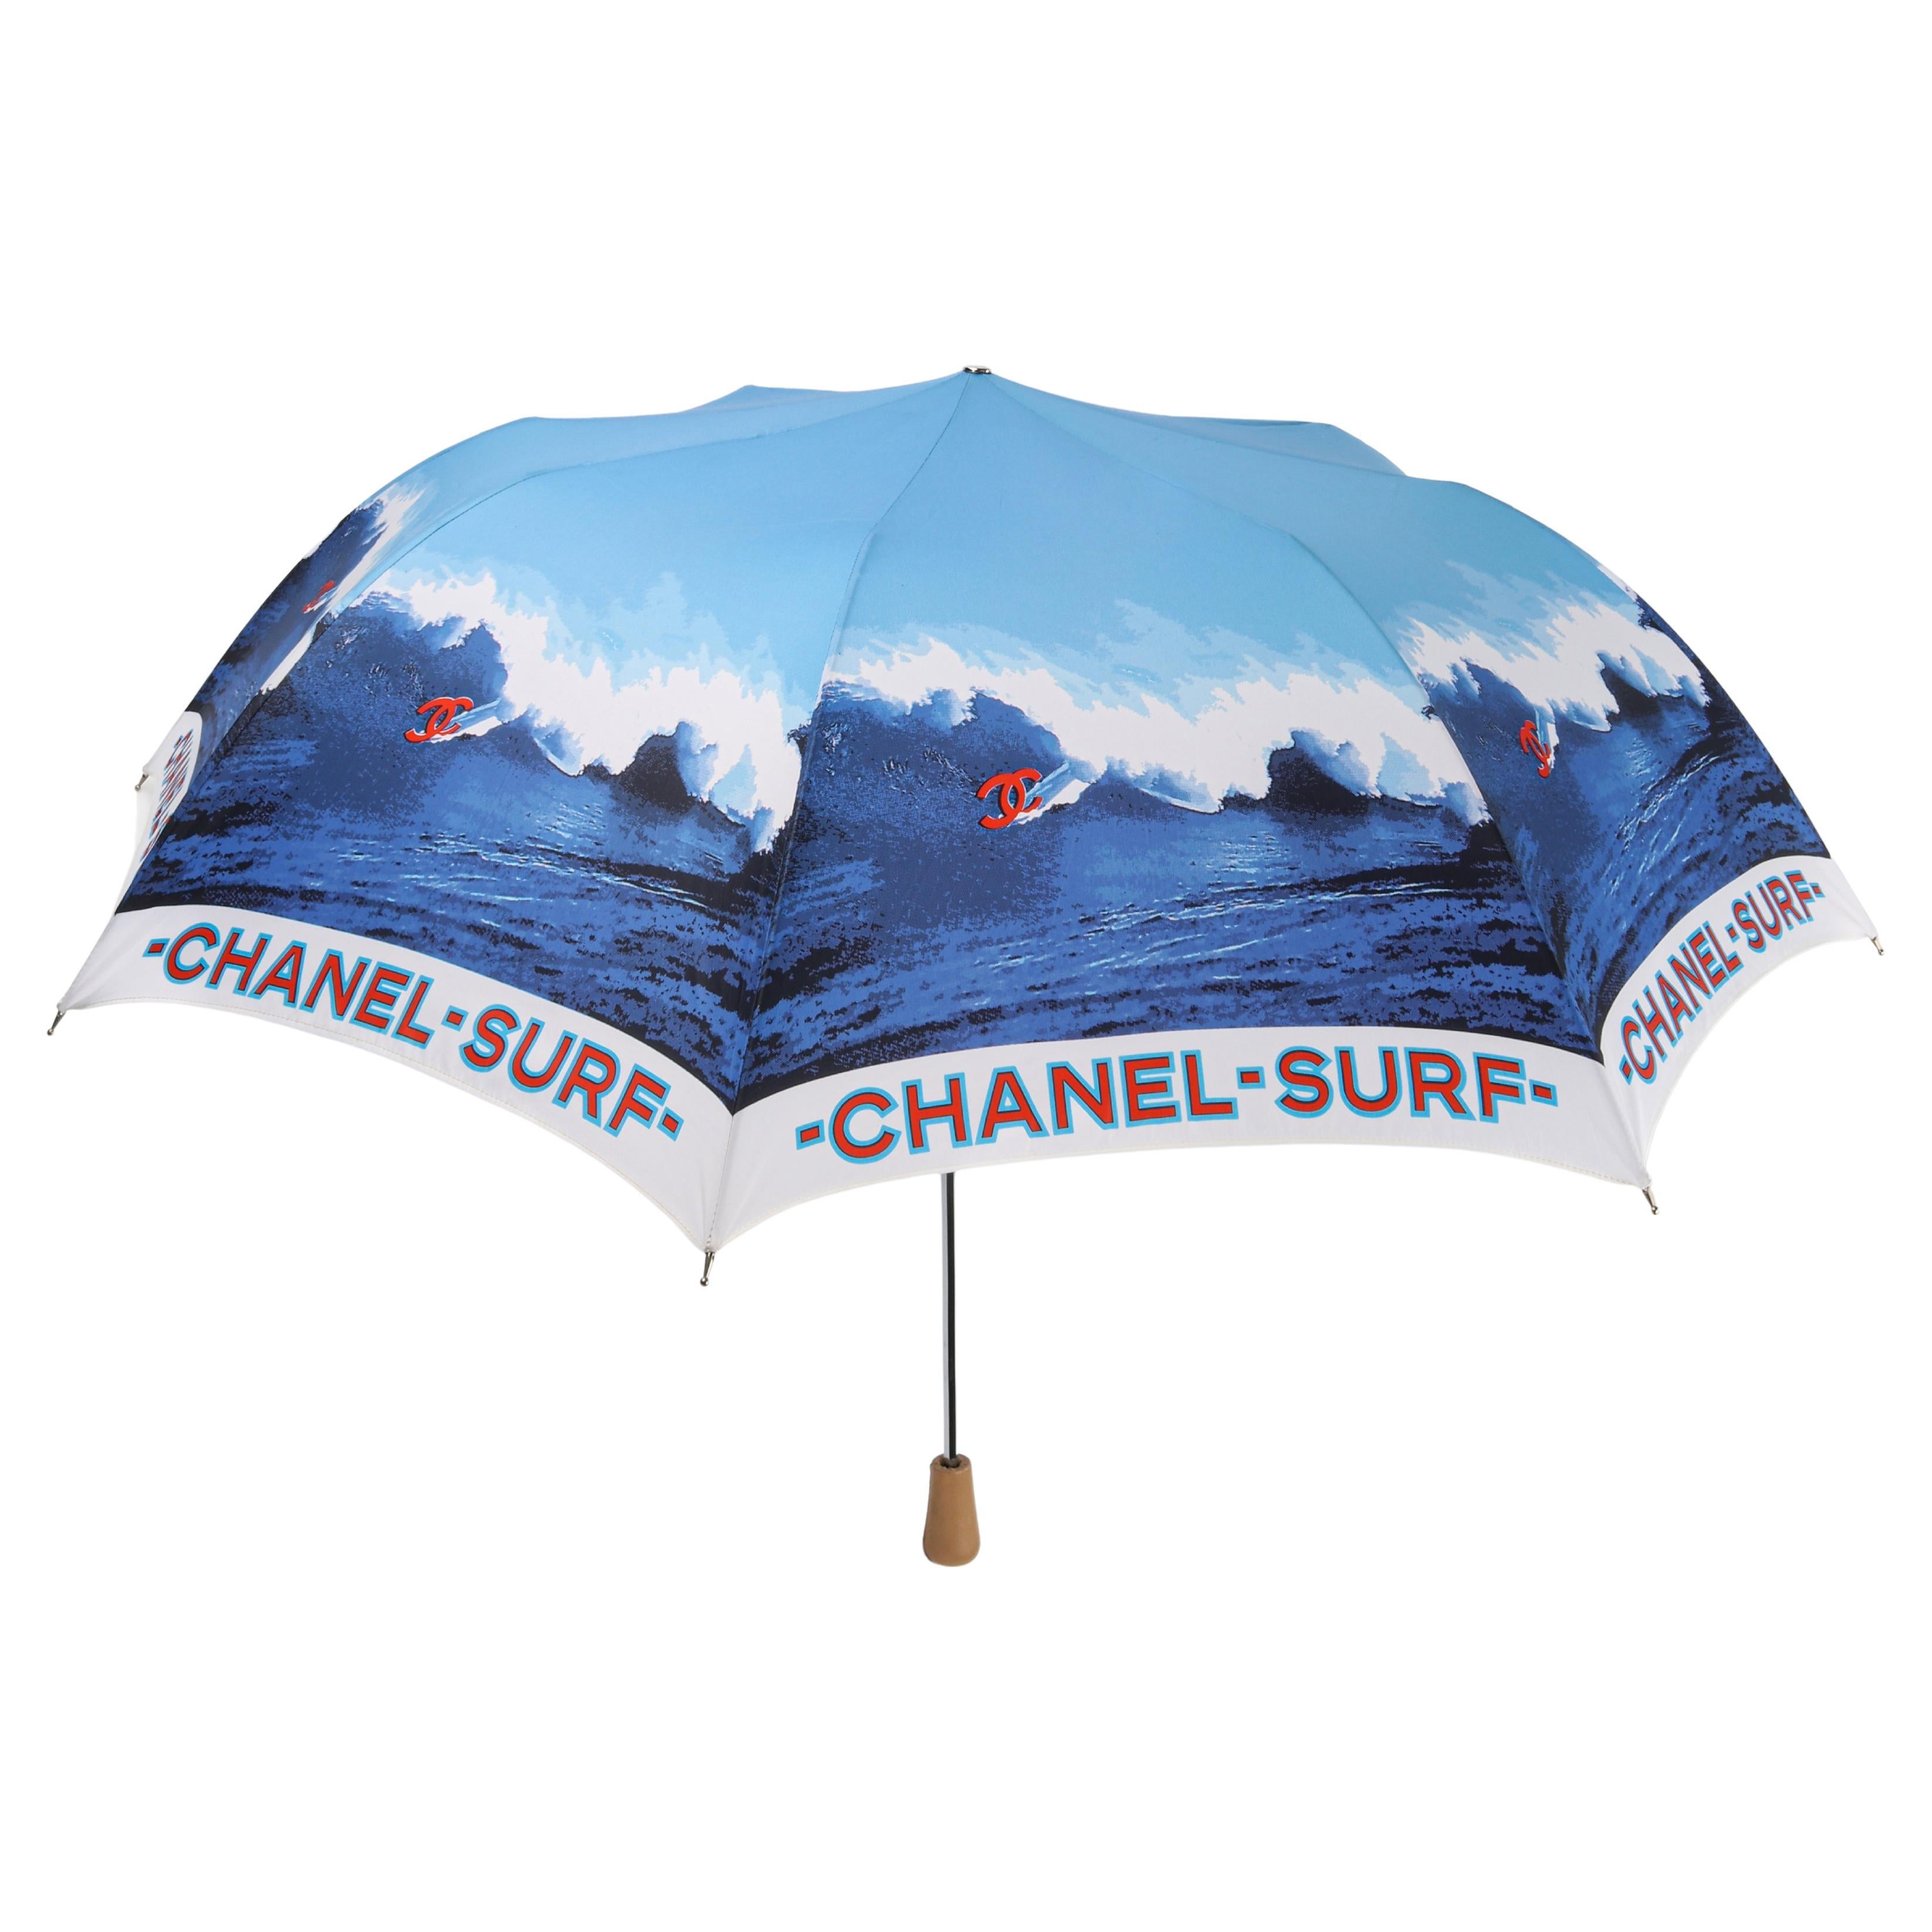 CHANEL 2002 "Surf Line" Red White Blue CC Wave Large Parasol Umbrella w/ Cover For Sale